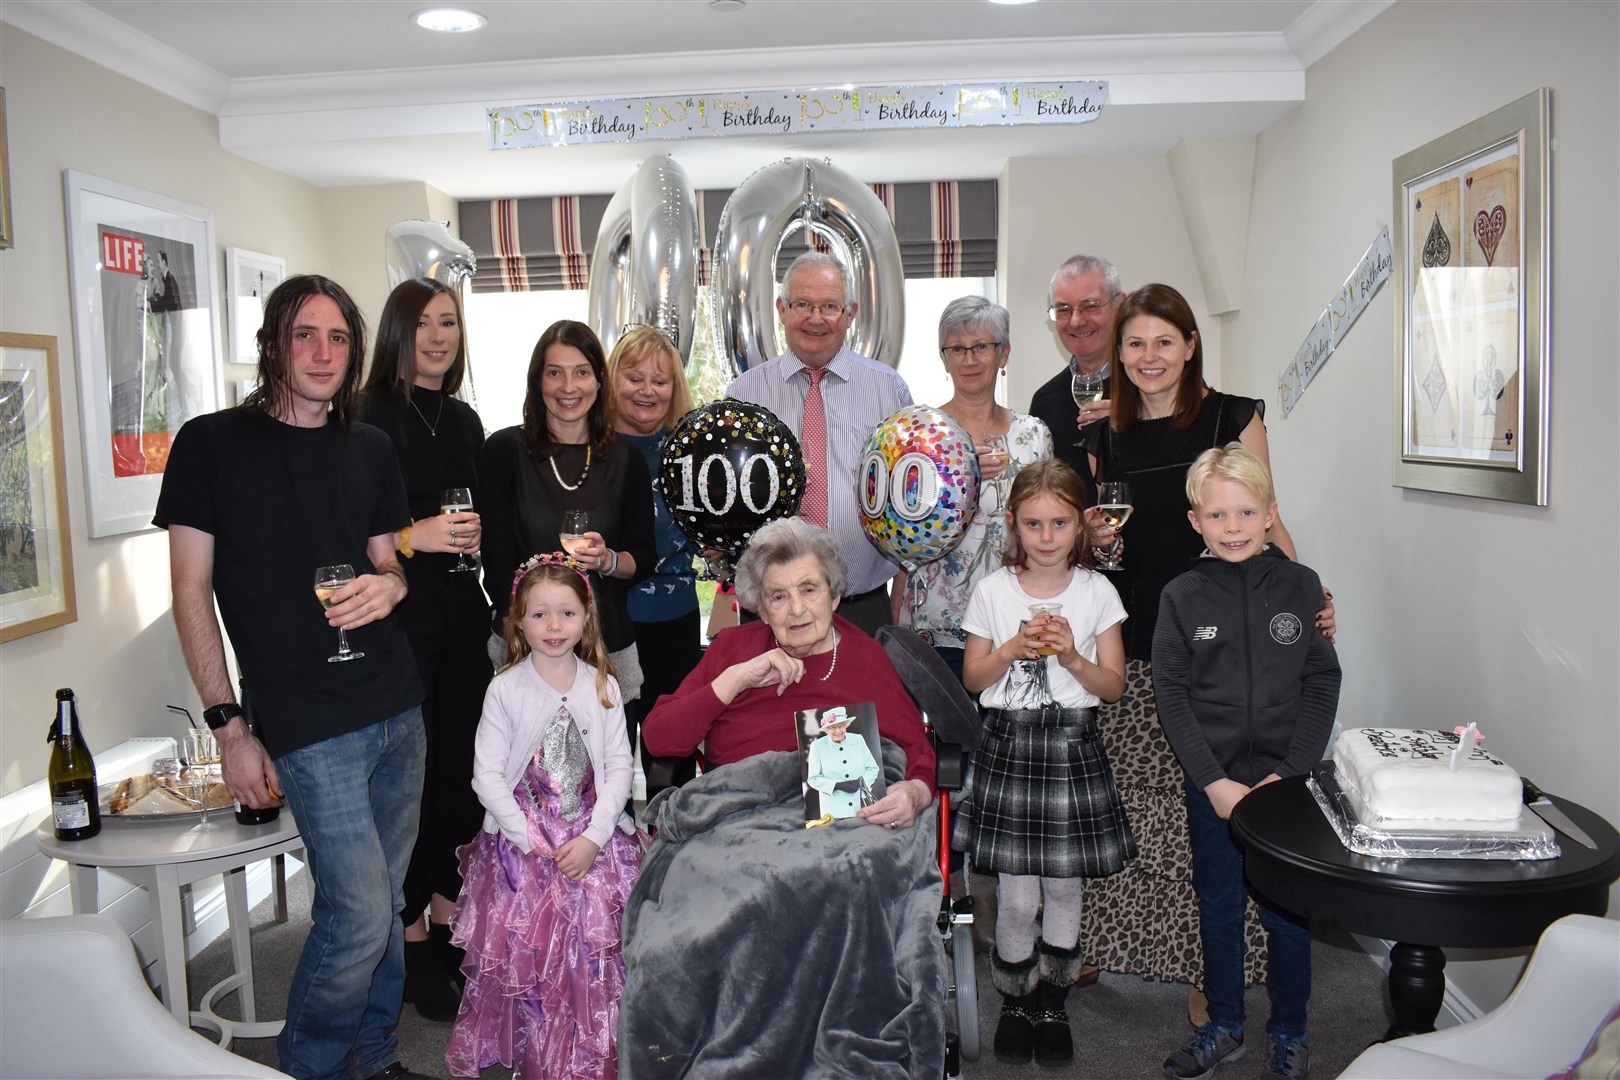 Beatrice Mackay with friends and family at her recent 100th birthday celebration.